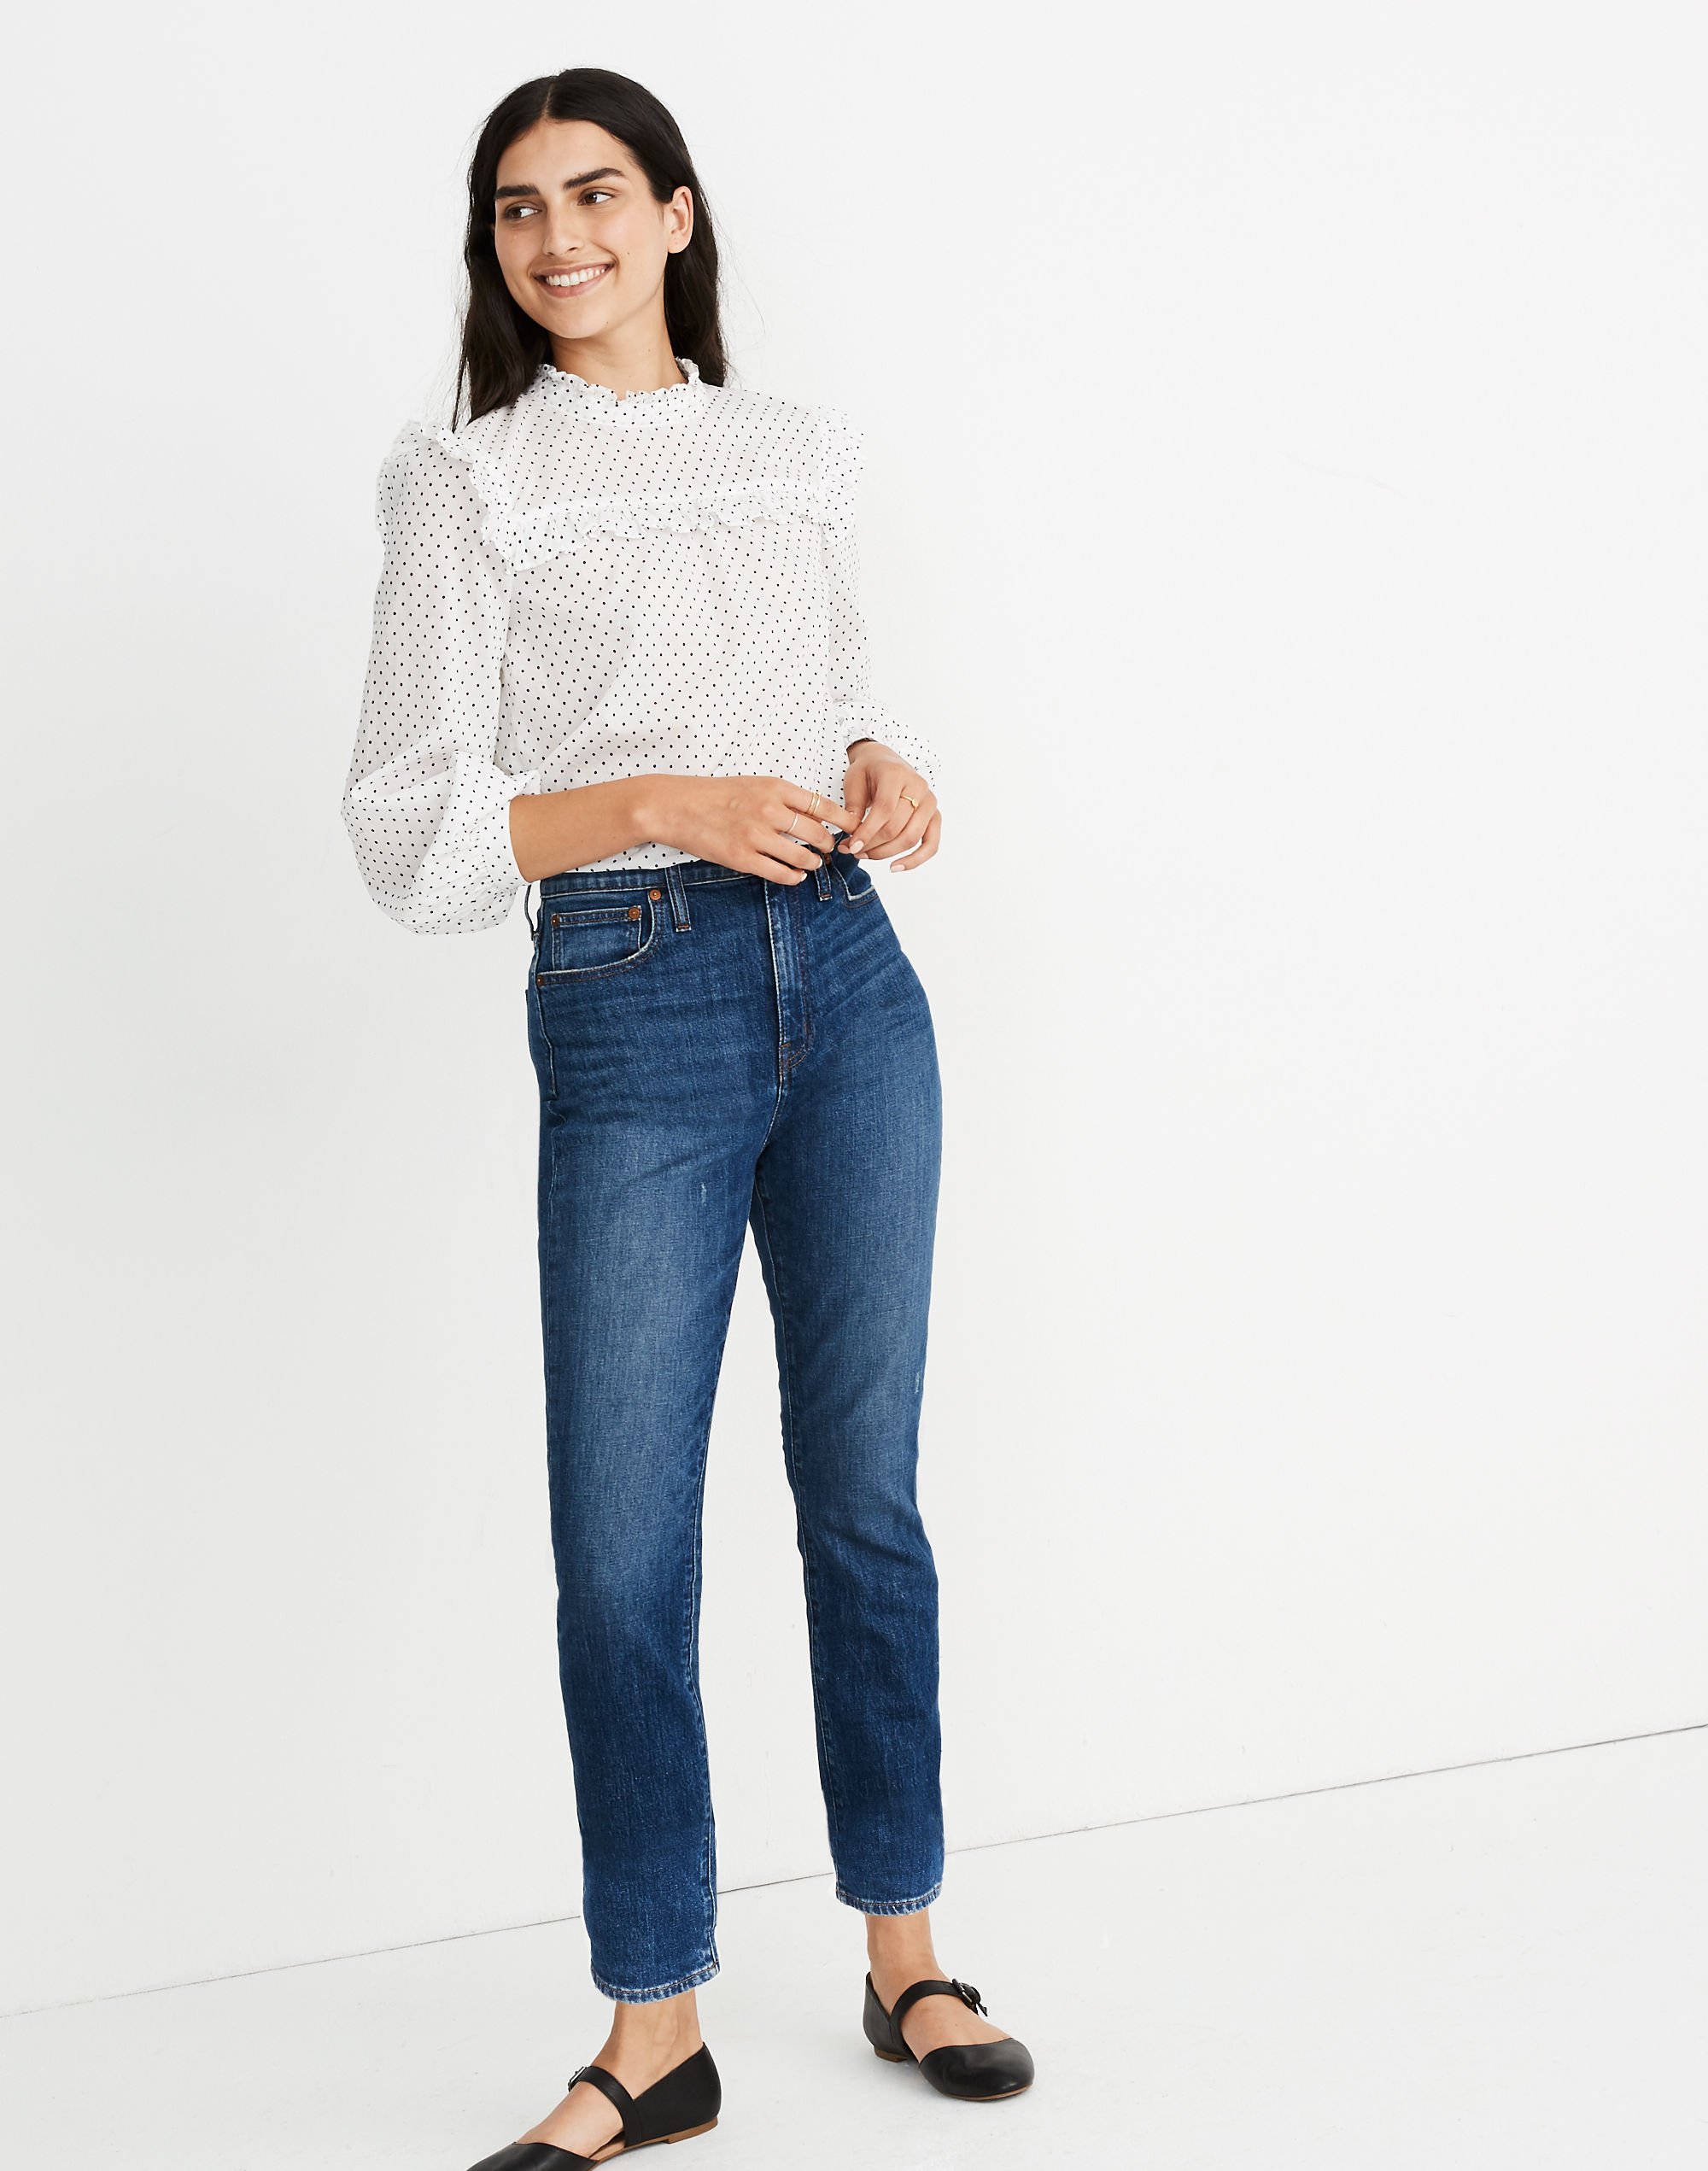 Superwide-Leg Jeans in Selwick Wash: Button-Front Edition